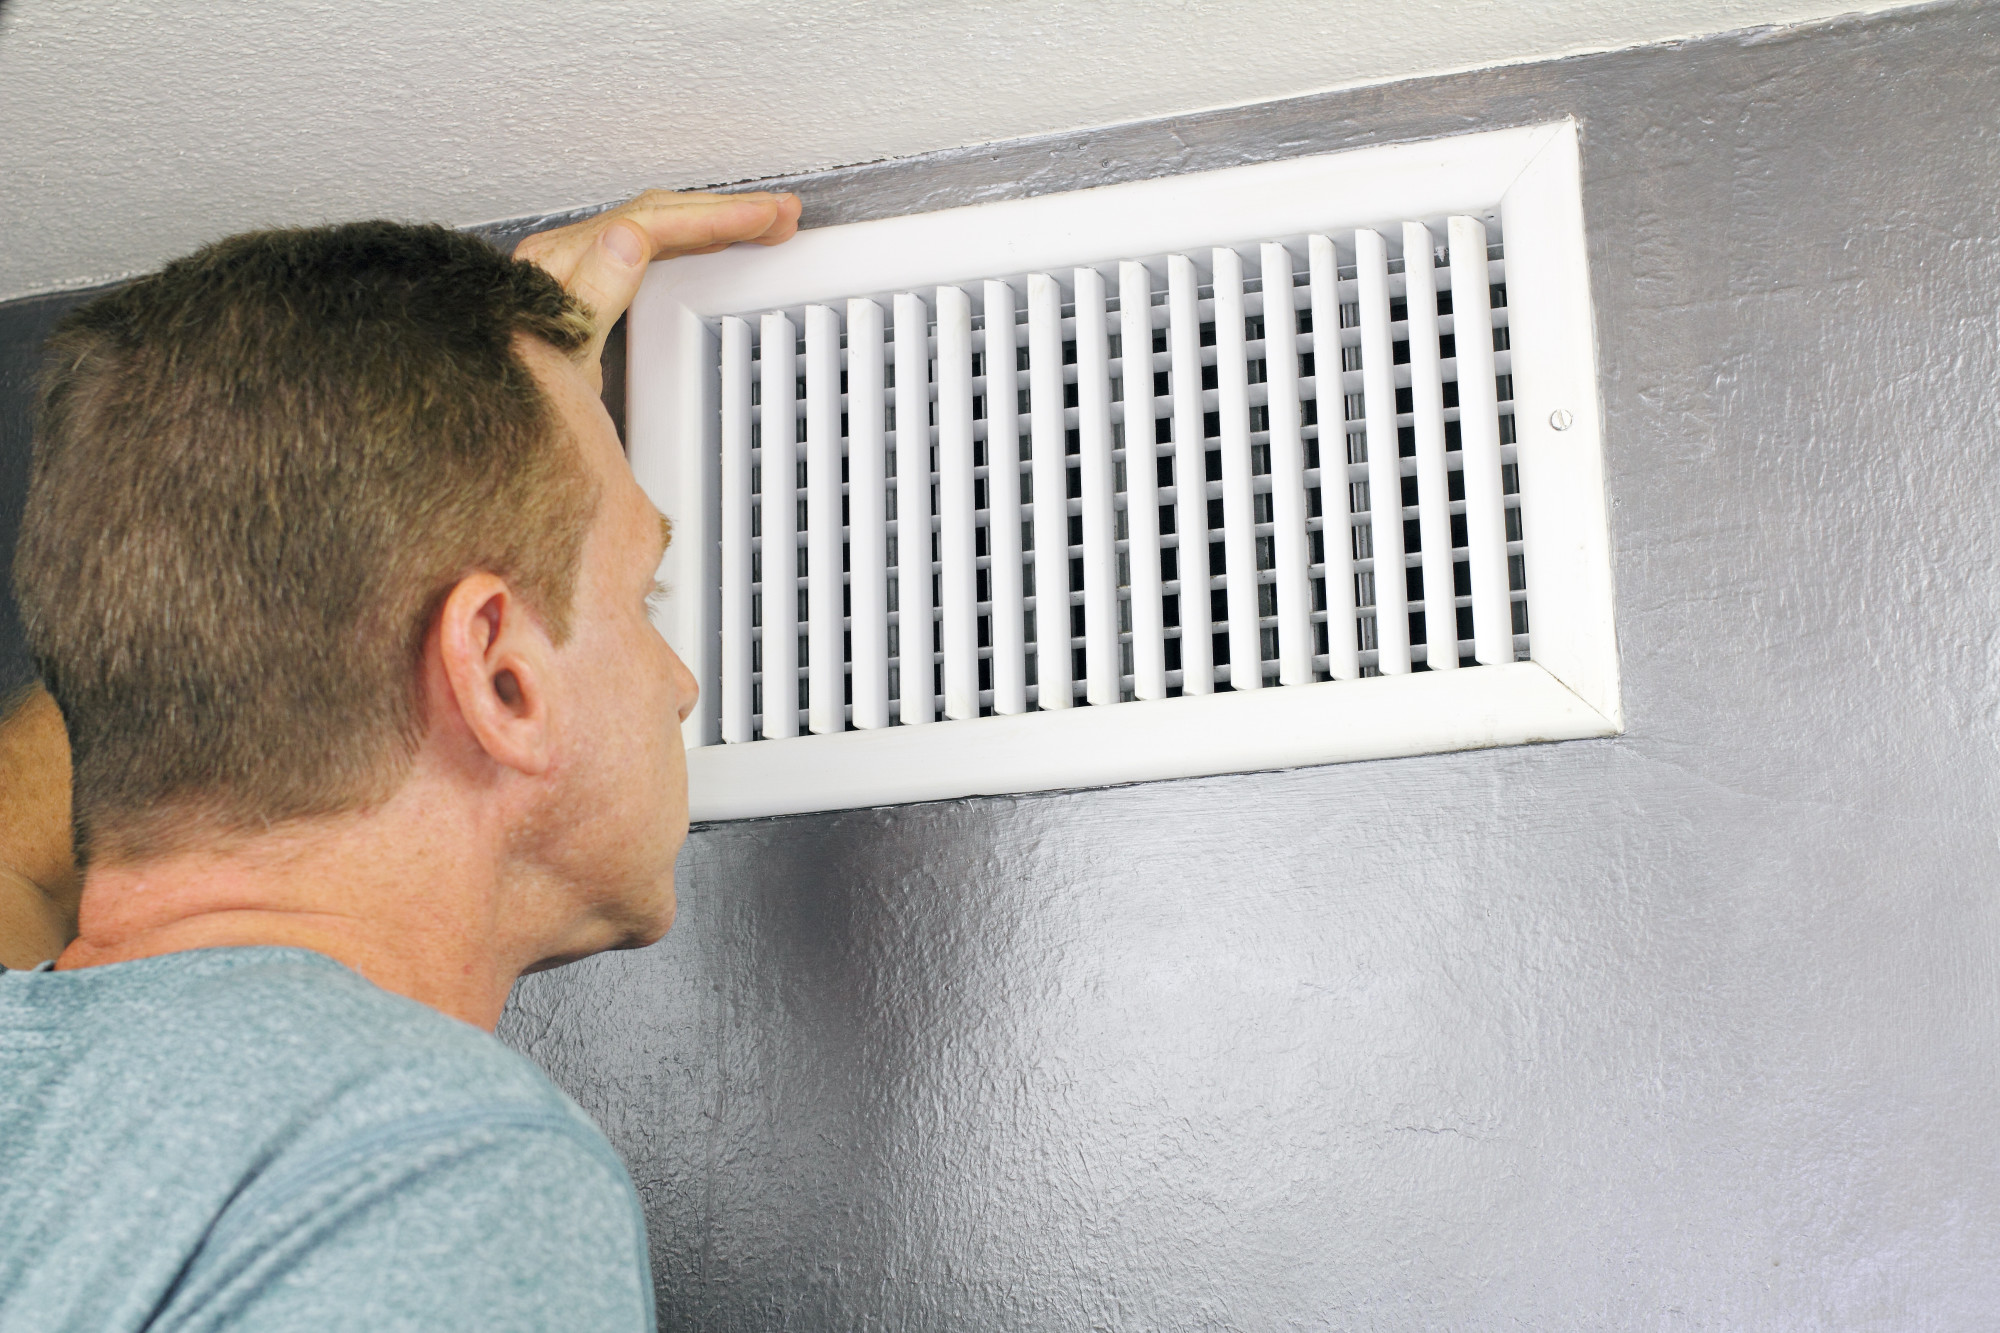 It is important to properly prepare your HVAC system to face the summer heat. Check out this helpful guide to make sure your unit is ready to go.